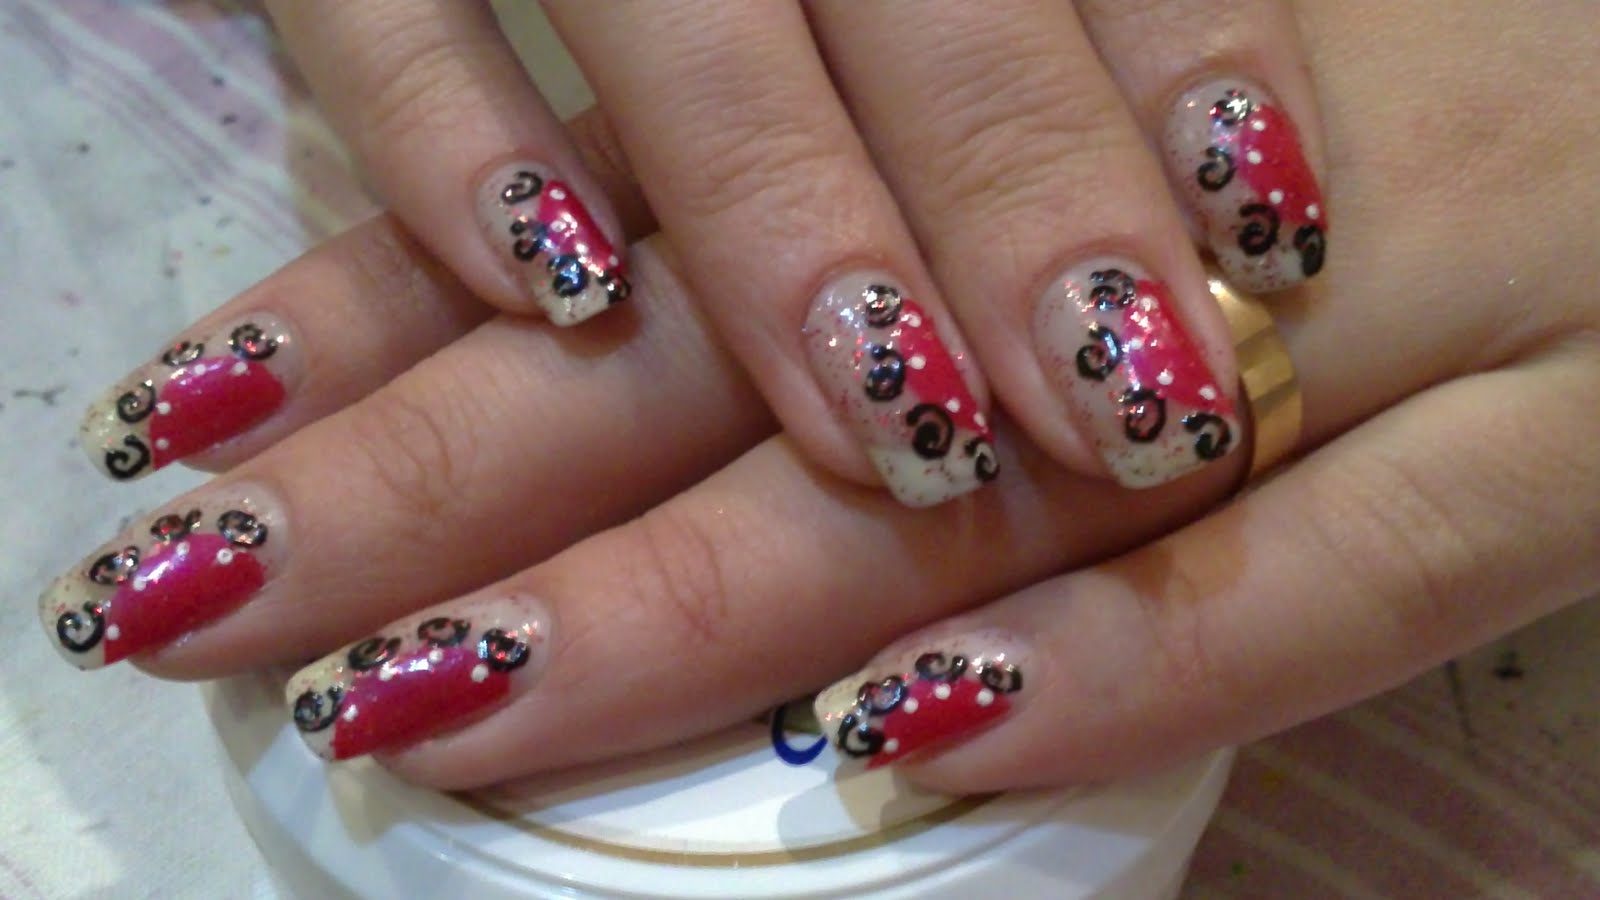 1. "DIY Nail Art with Danny Seo" - wide 9